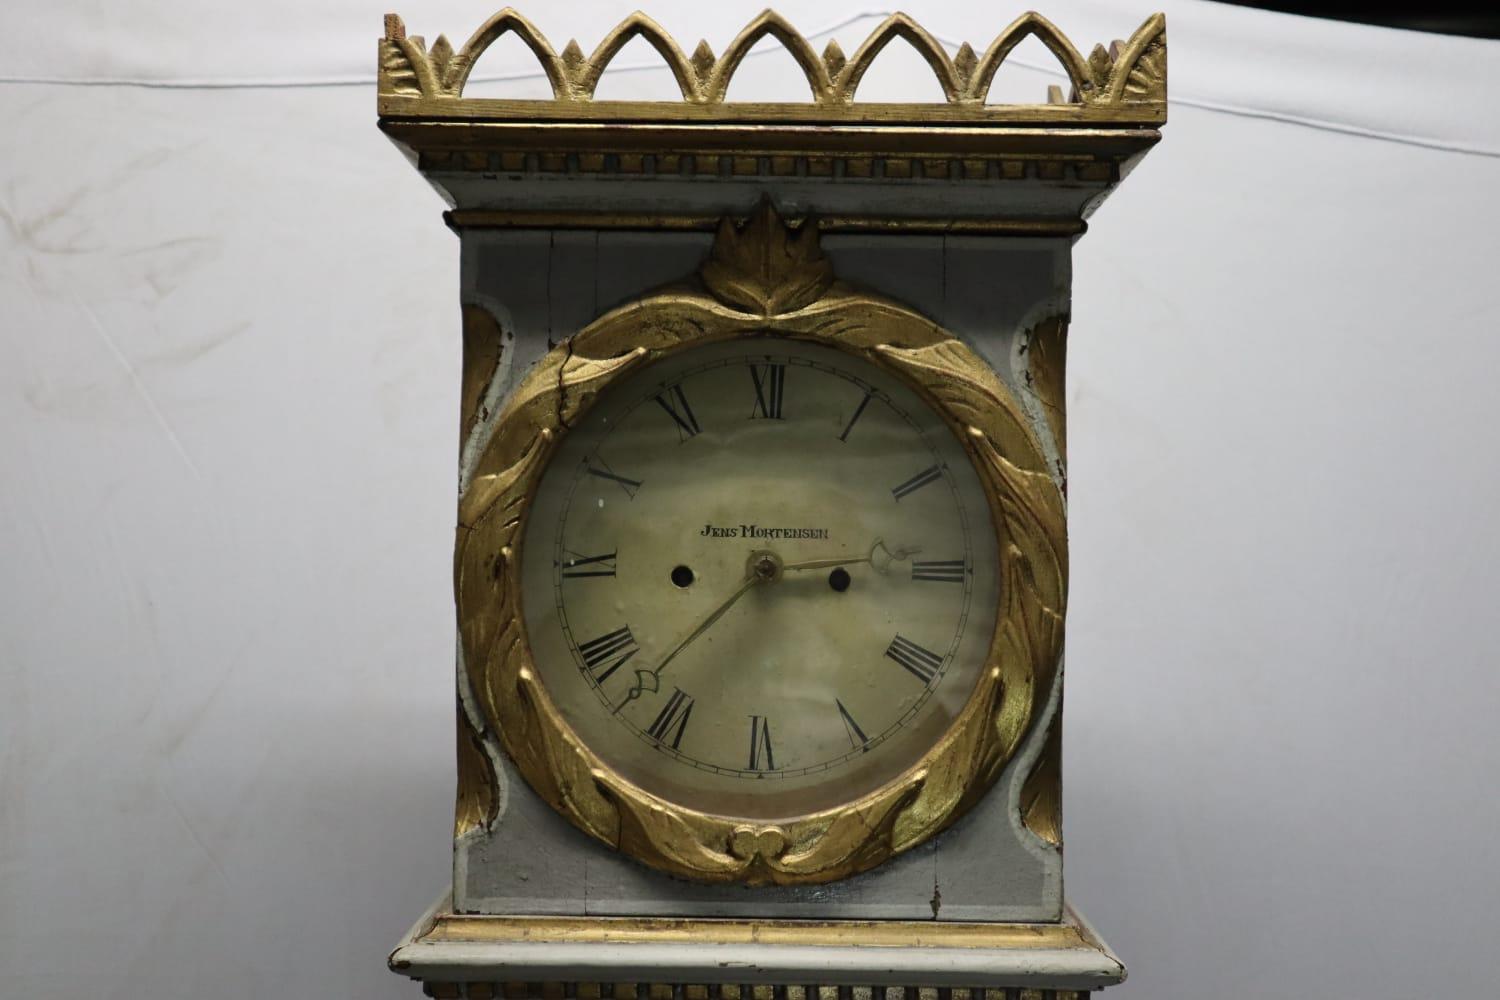 This stately Grandfather clock is from the first quarter of the 19th century. It is made in the traditional Scandinavian style of clock making and has charming and whimsical details on the face of the clock as well as filigreed wooden side access